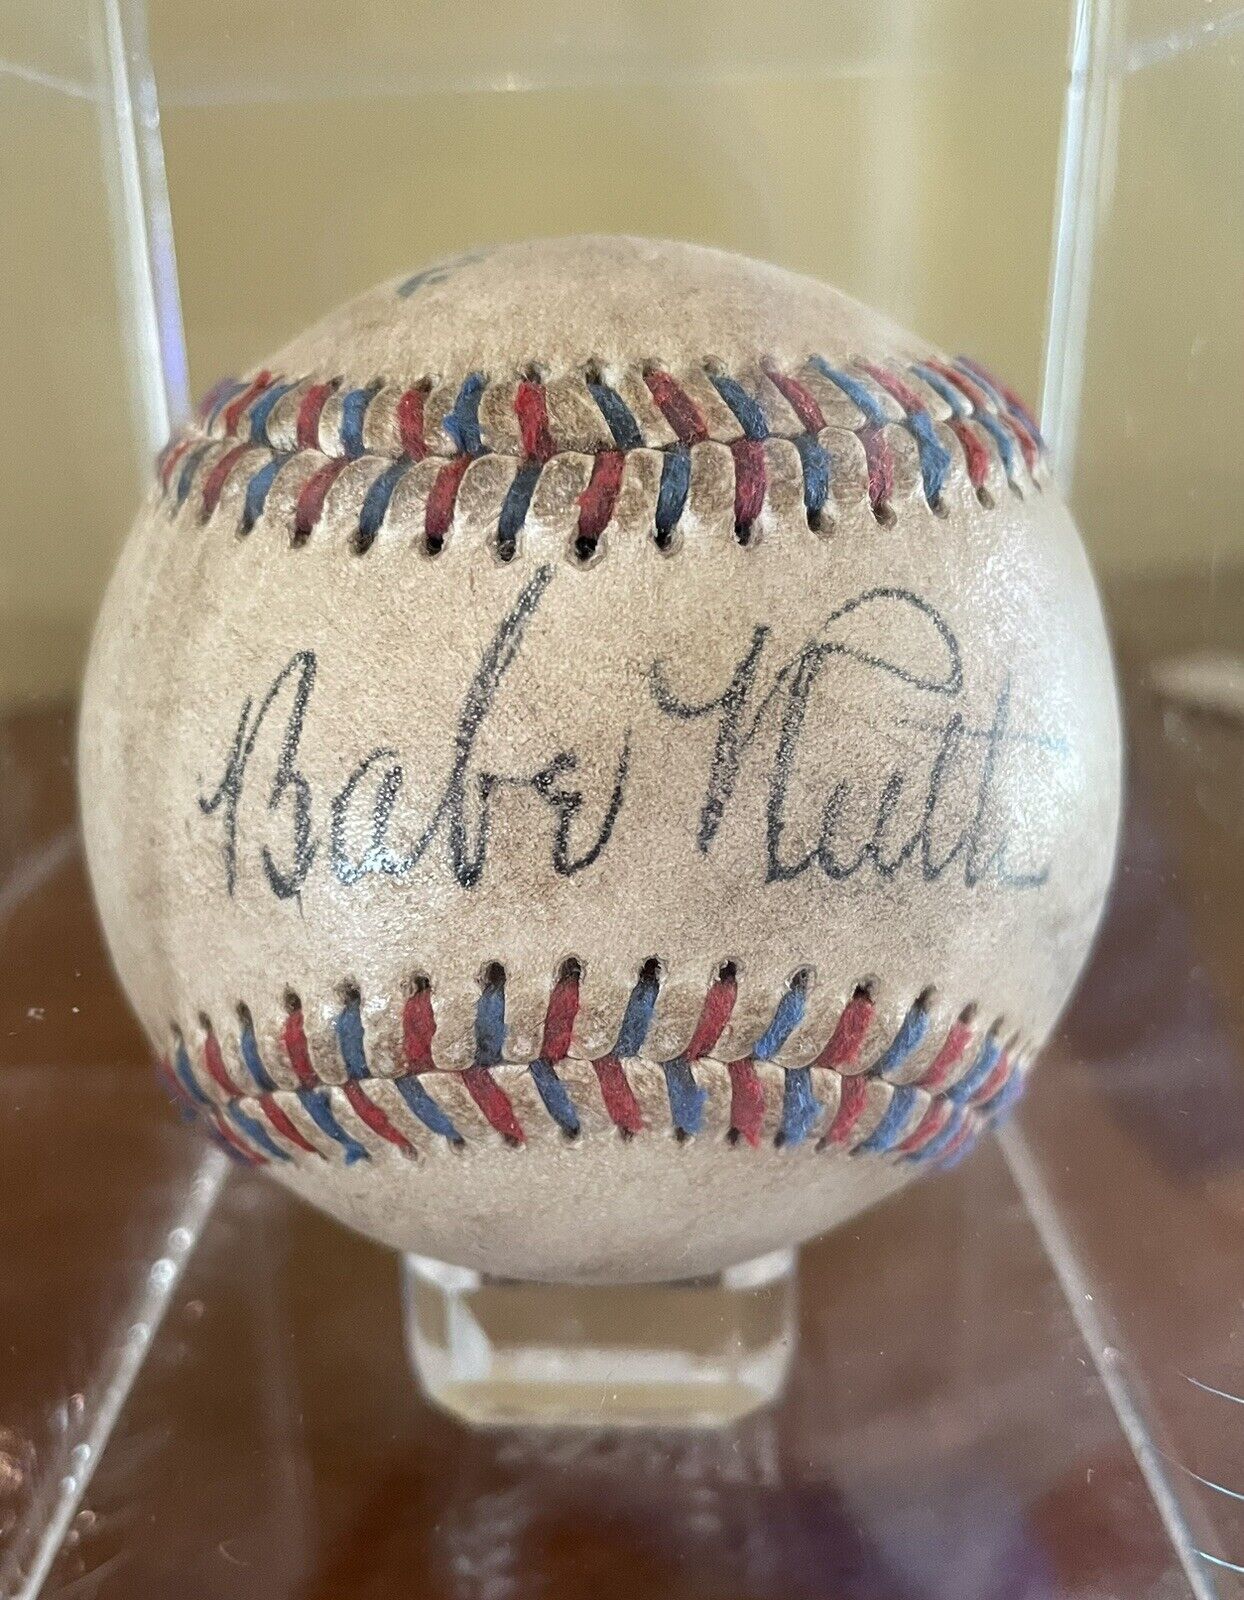 Babe Ruth - Autographed Baseball - Beautiful High Quality Replica